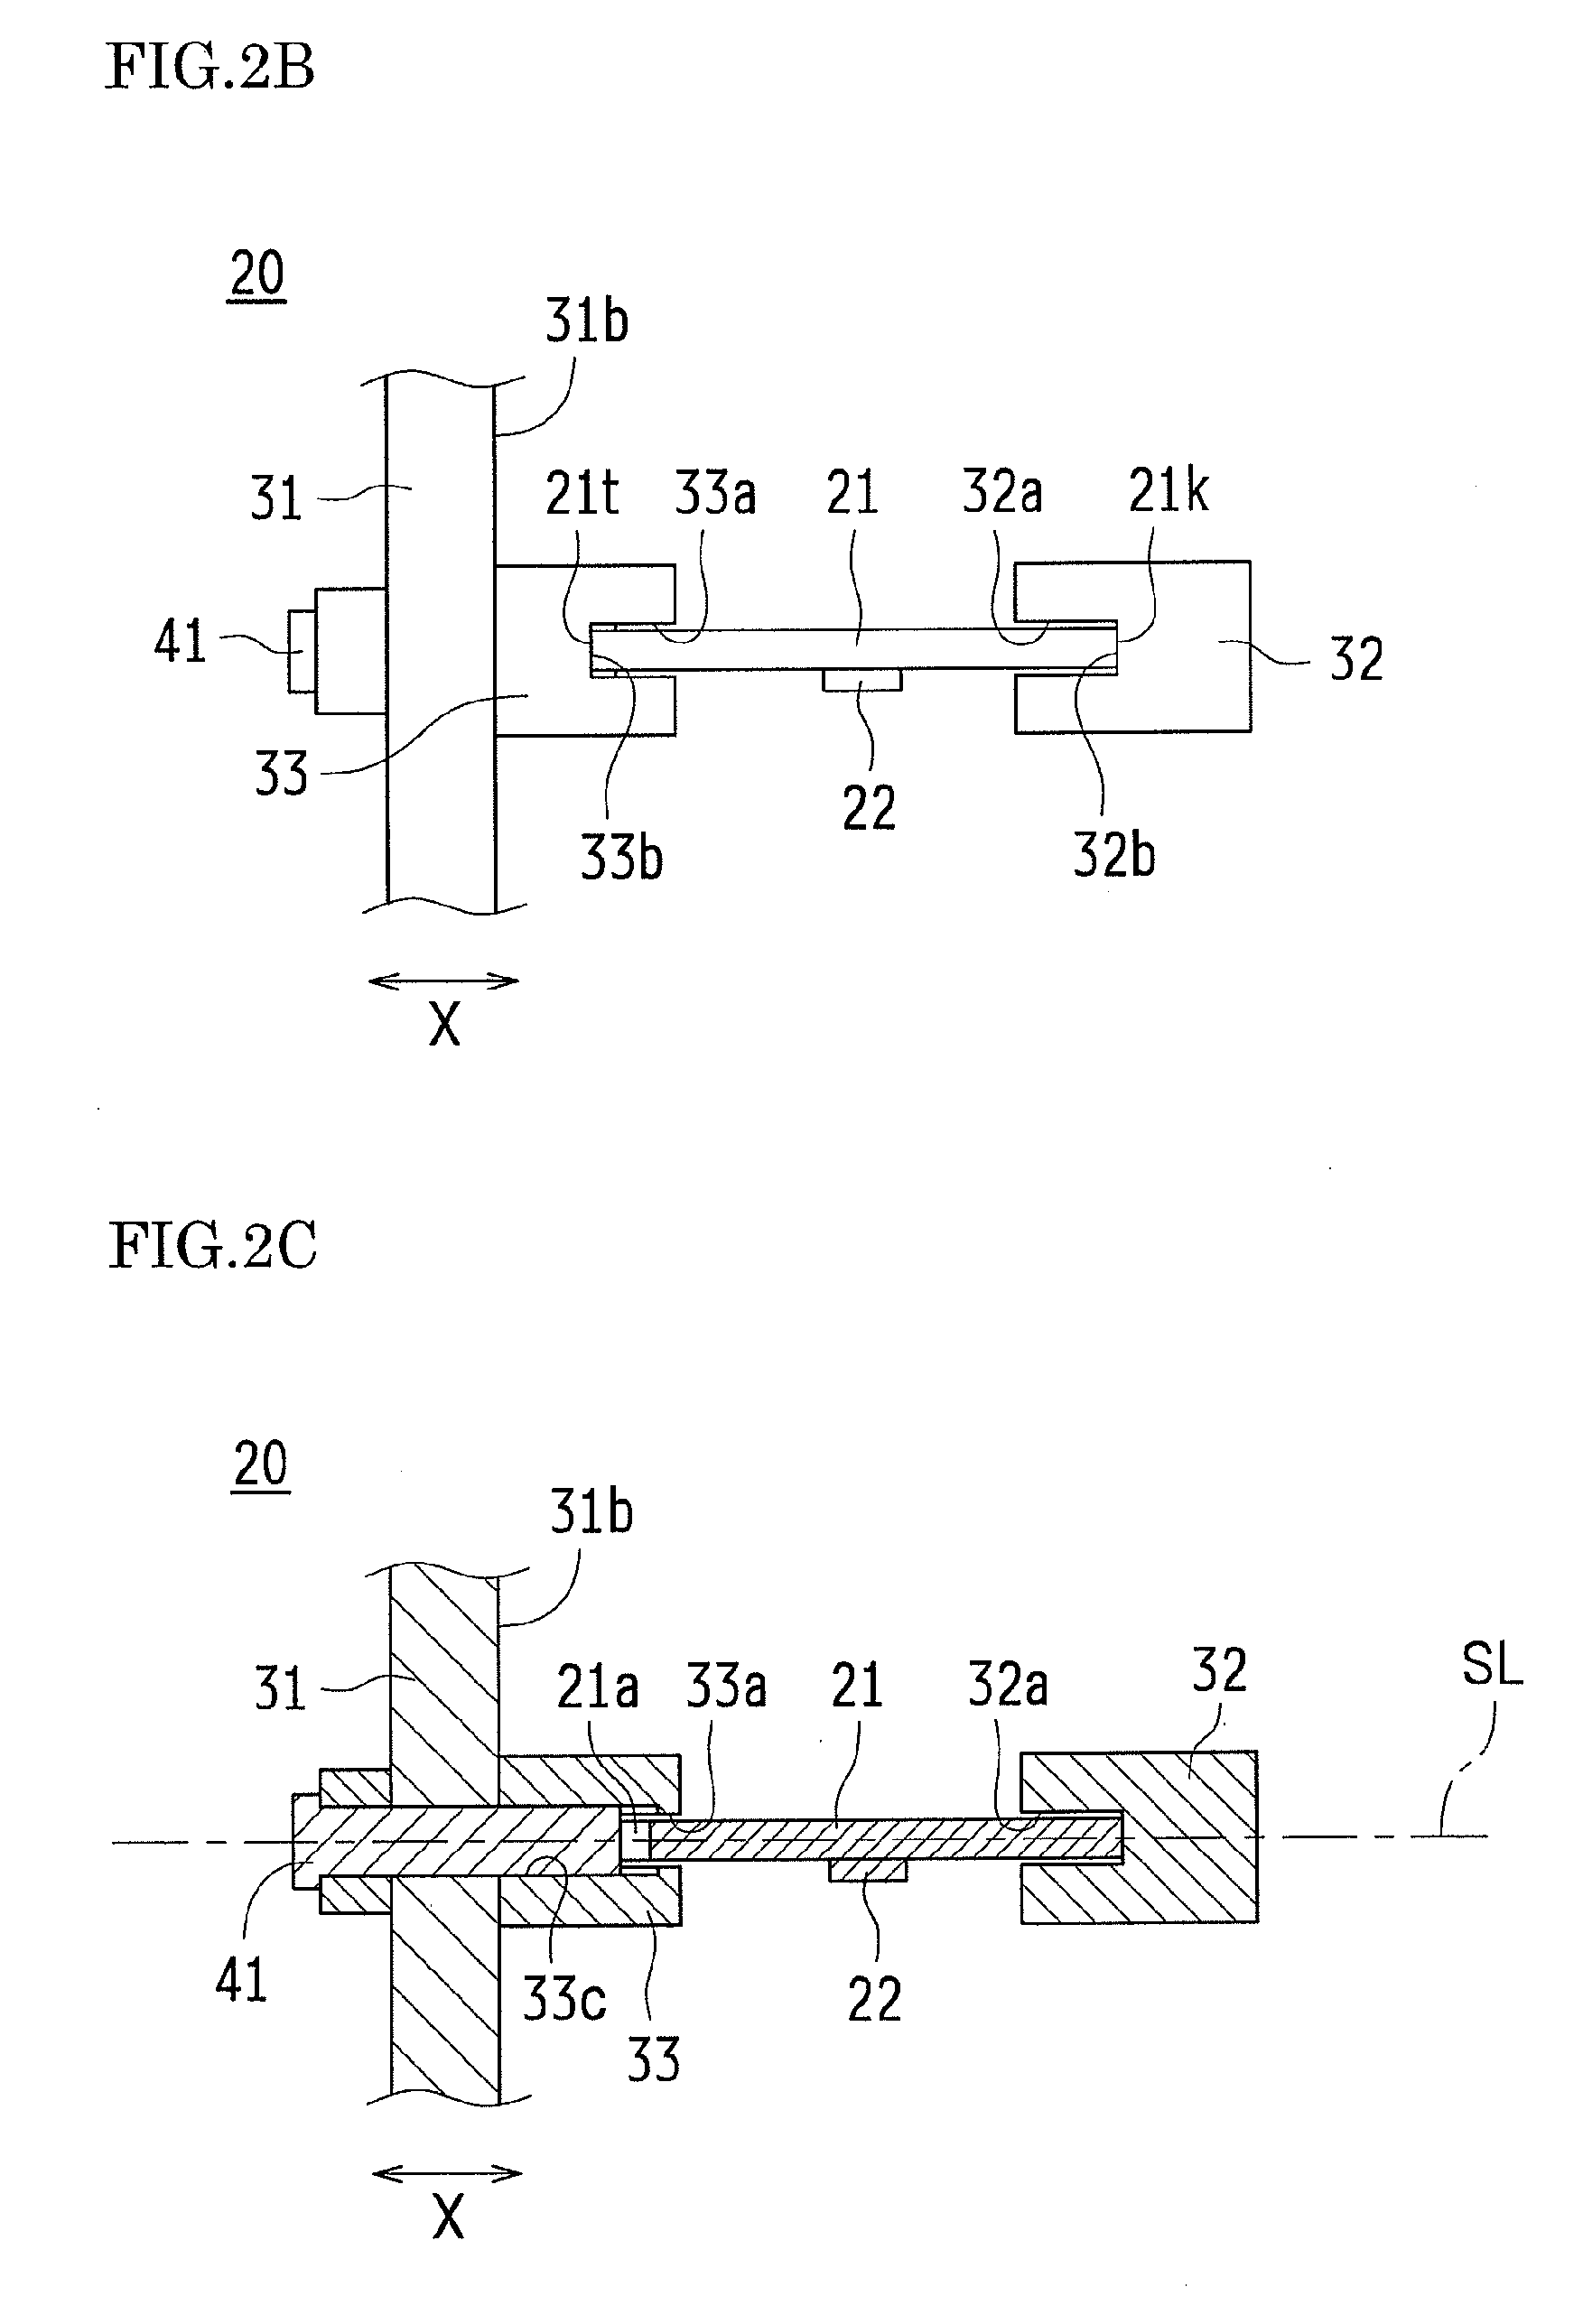 Substrate fastening structure, optical scanning device, and image forming apparatus